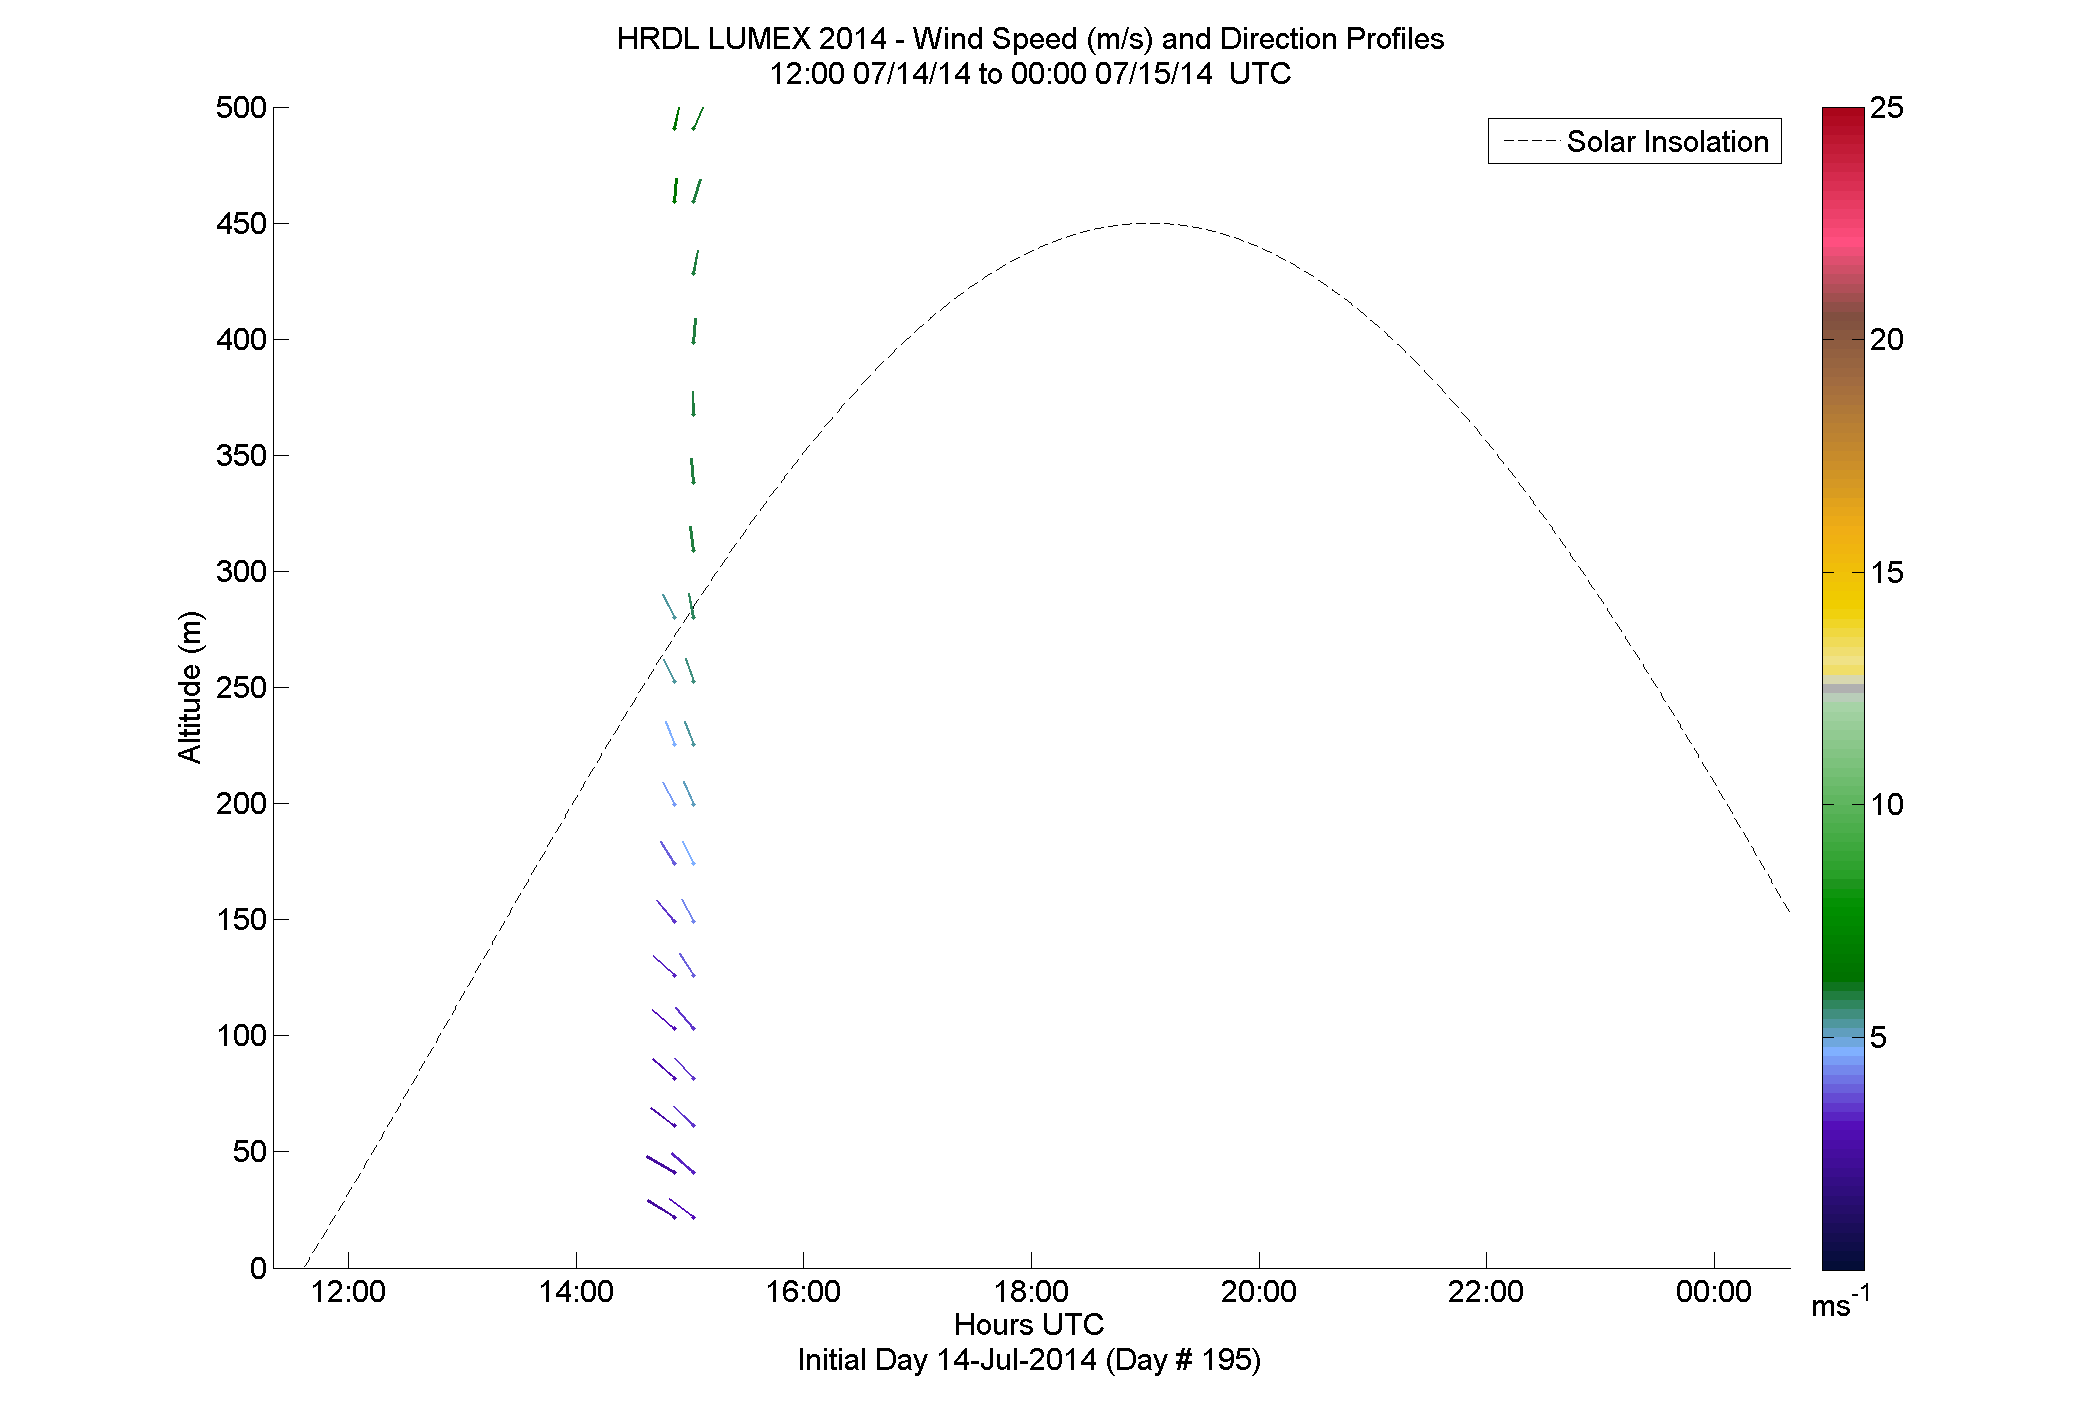 HRDL speed and direction profile - July 14 pm